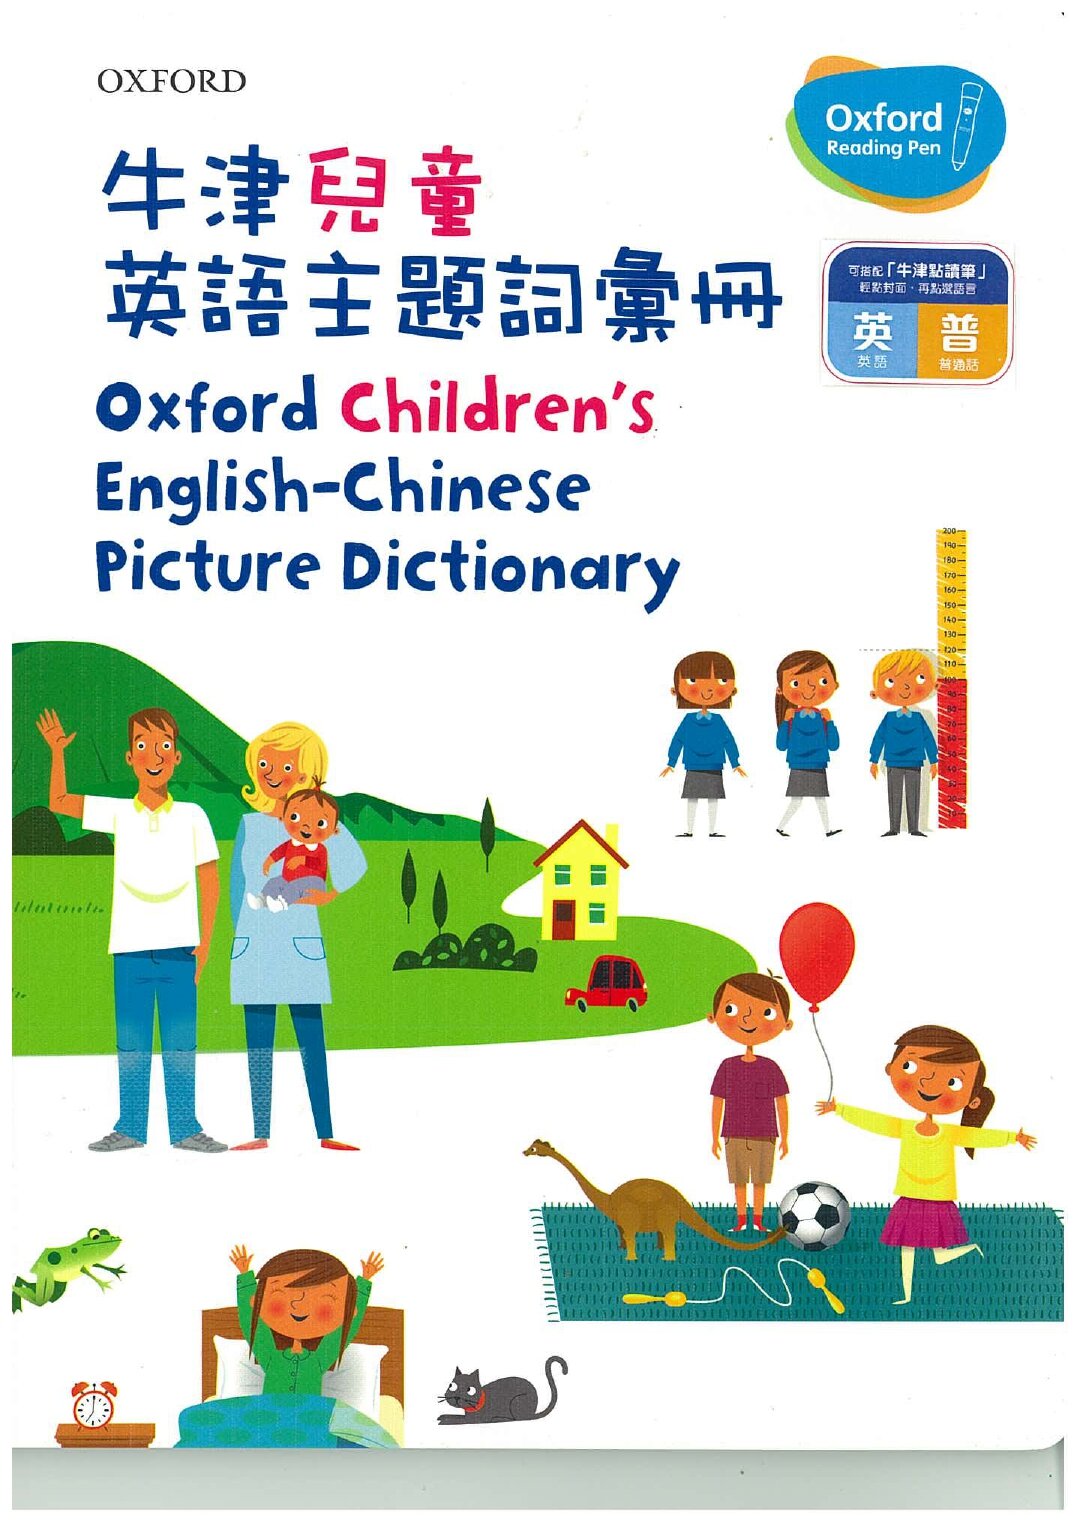 Oxford Children’s English-Chinese Picture Dictionary